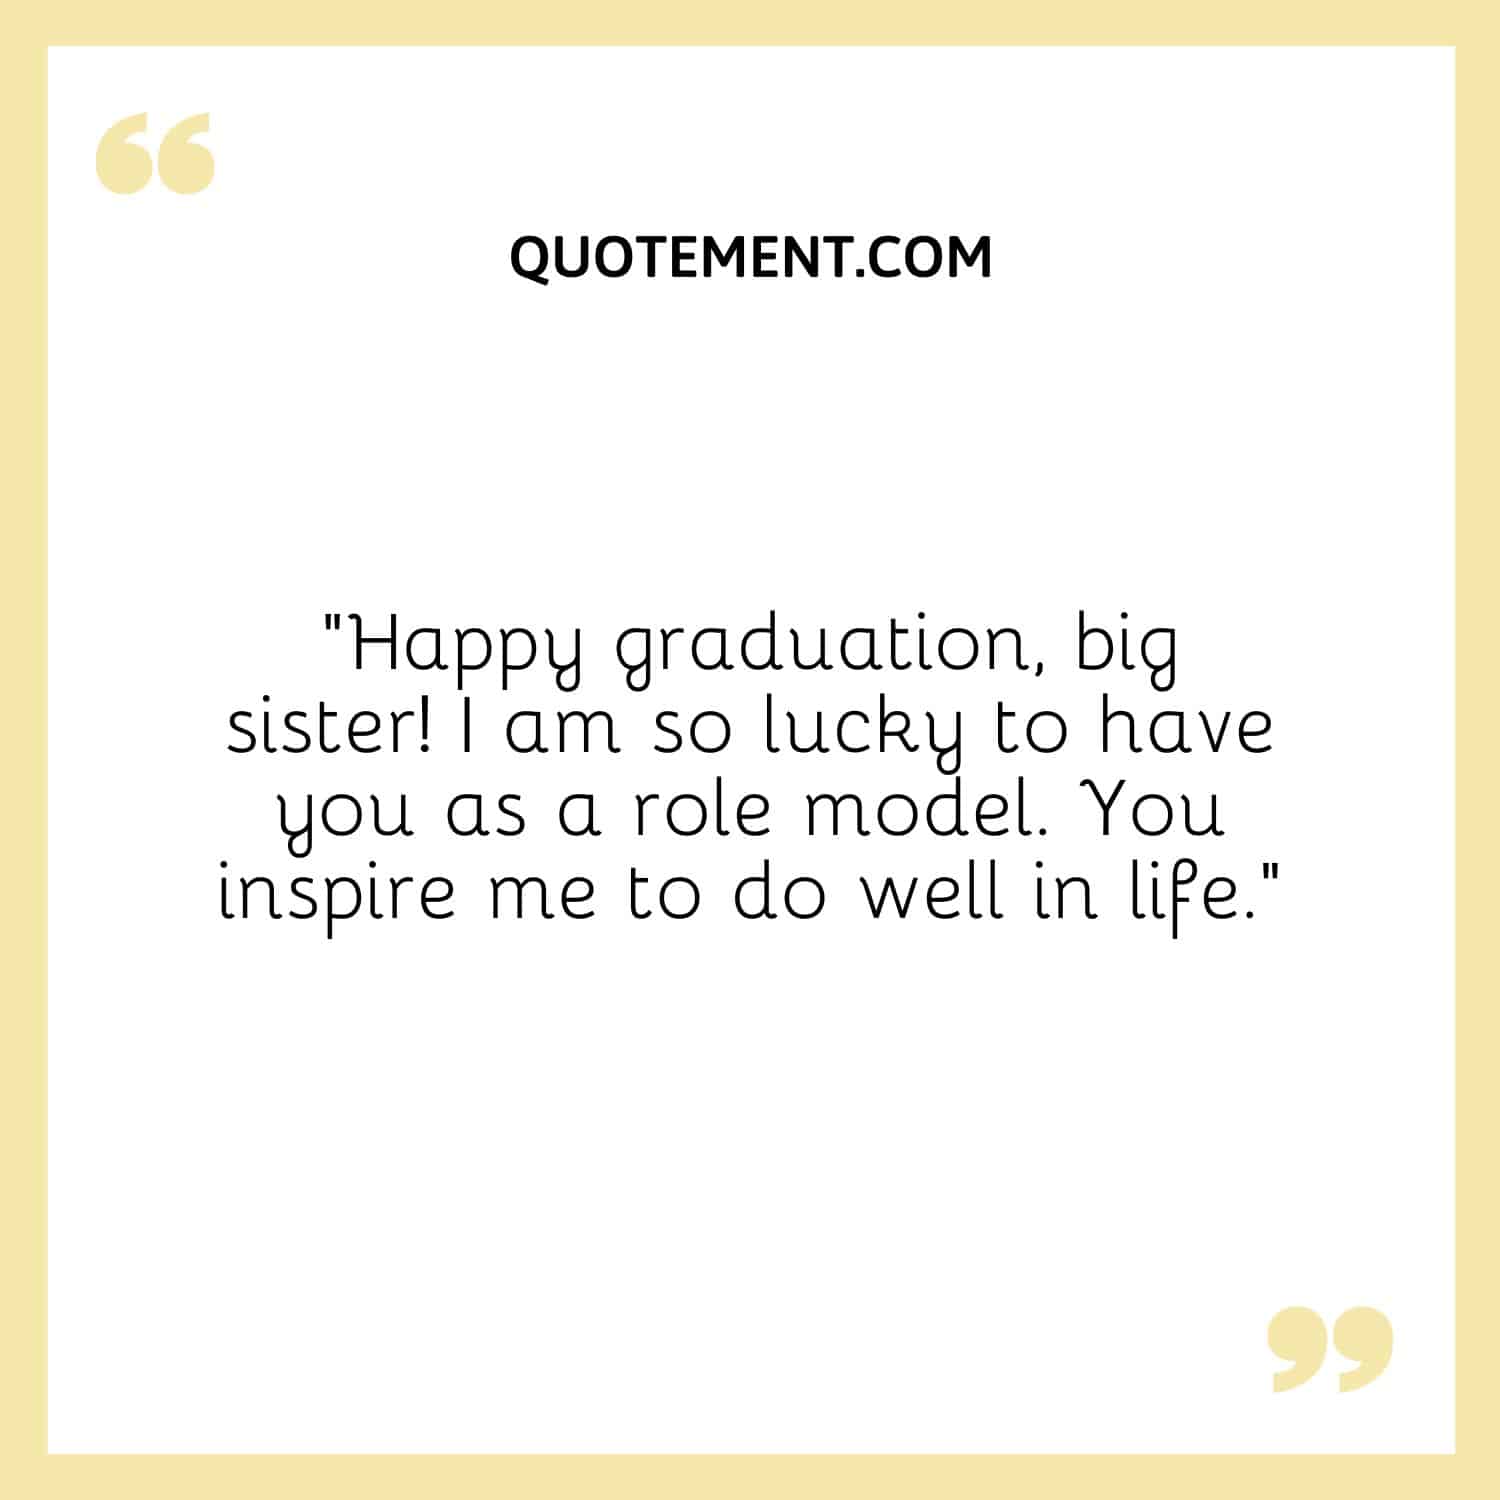 “Happy graduation, big sister! I am so lucky to have you as a role model. You inspire me to do well in life.”